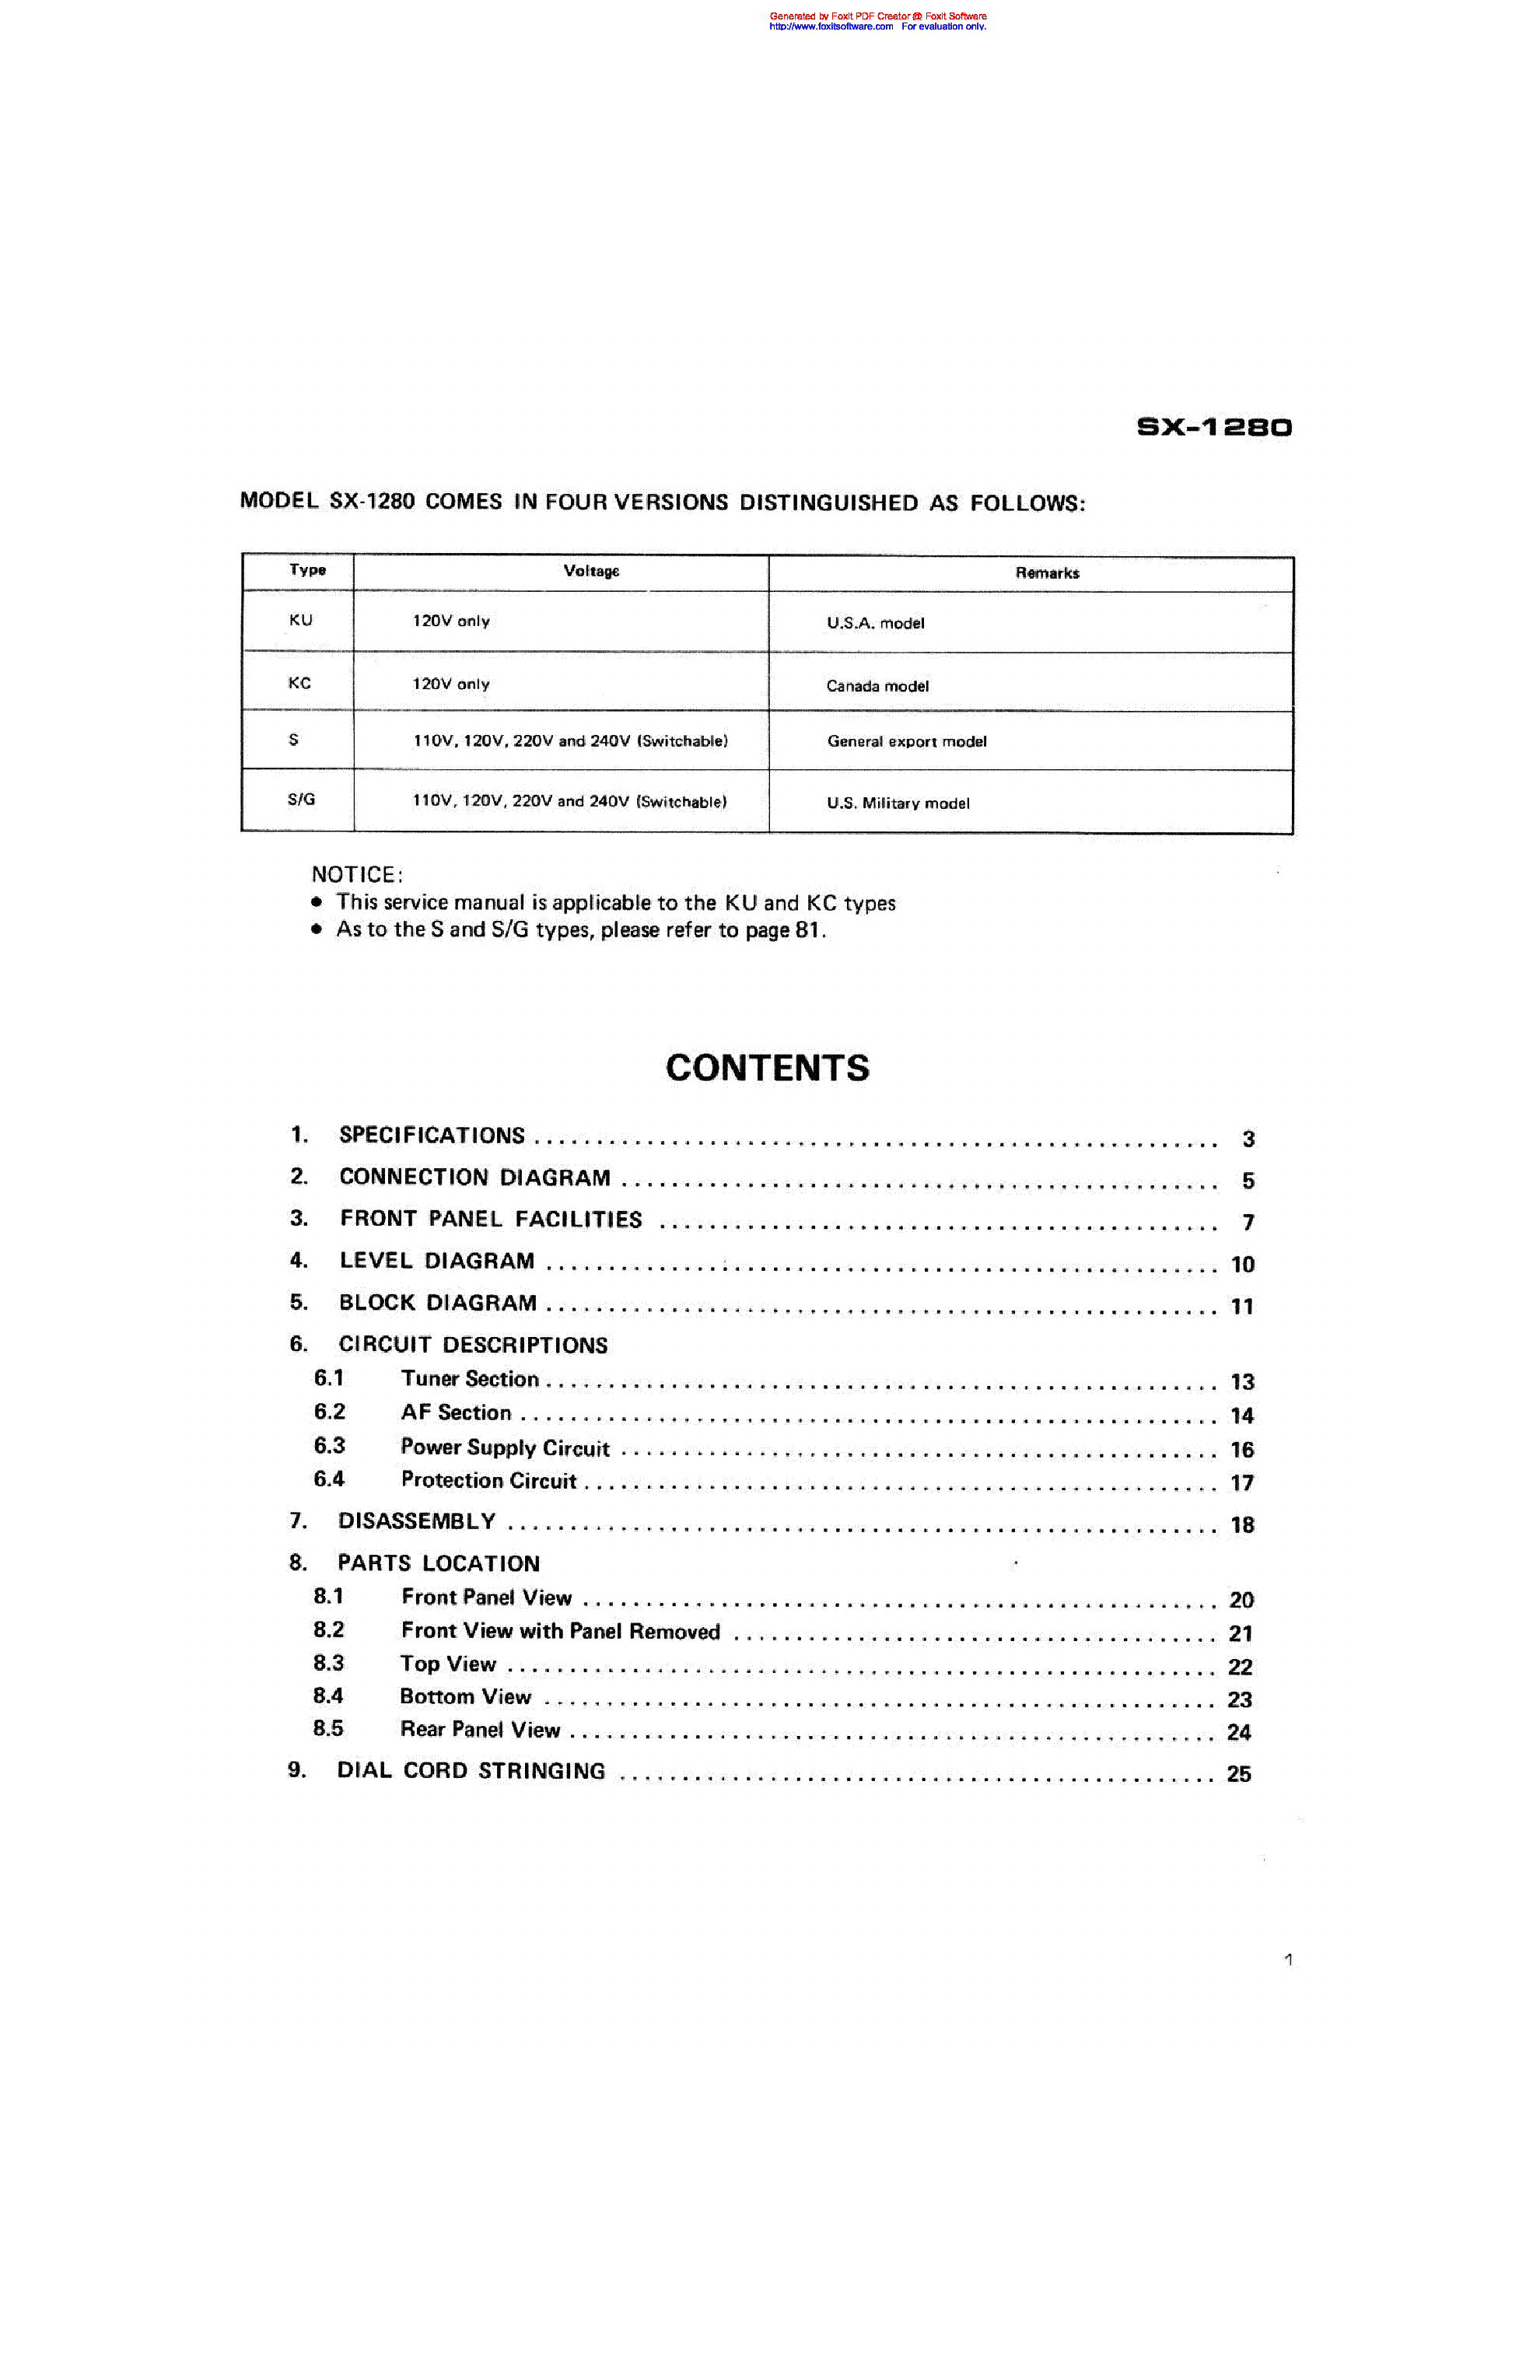 PIONEER SX-1280 service manual (2nd page)